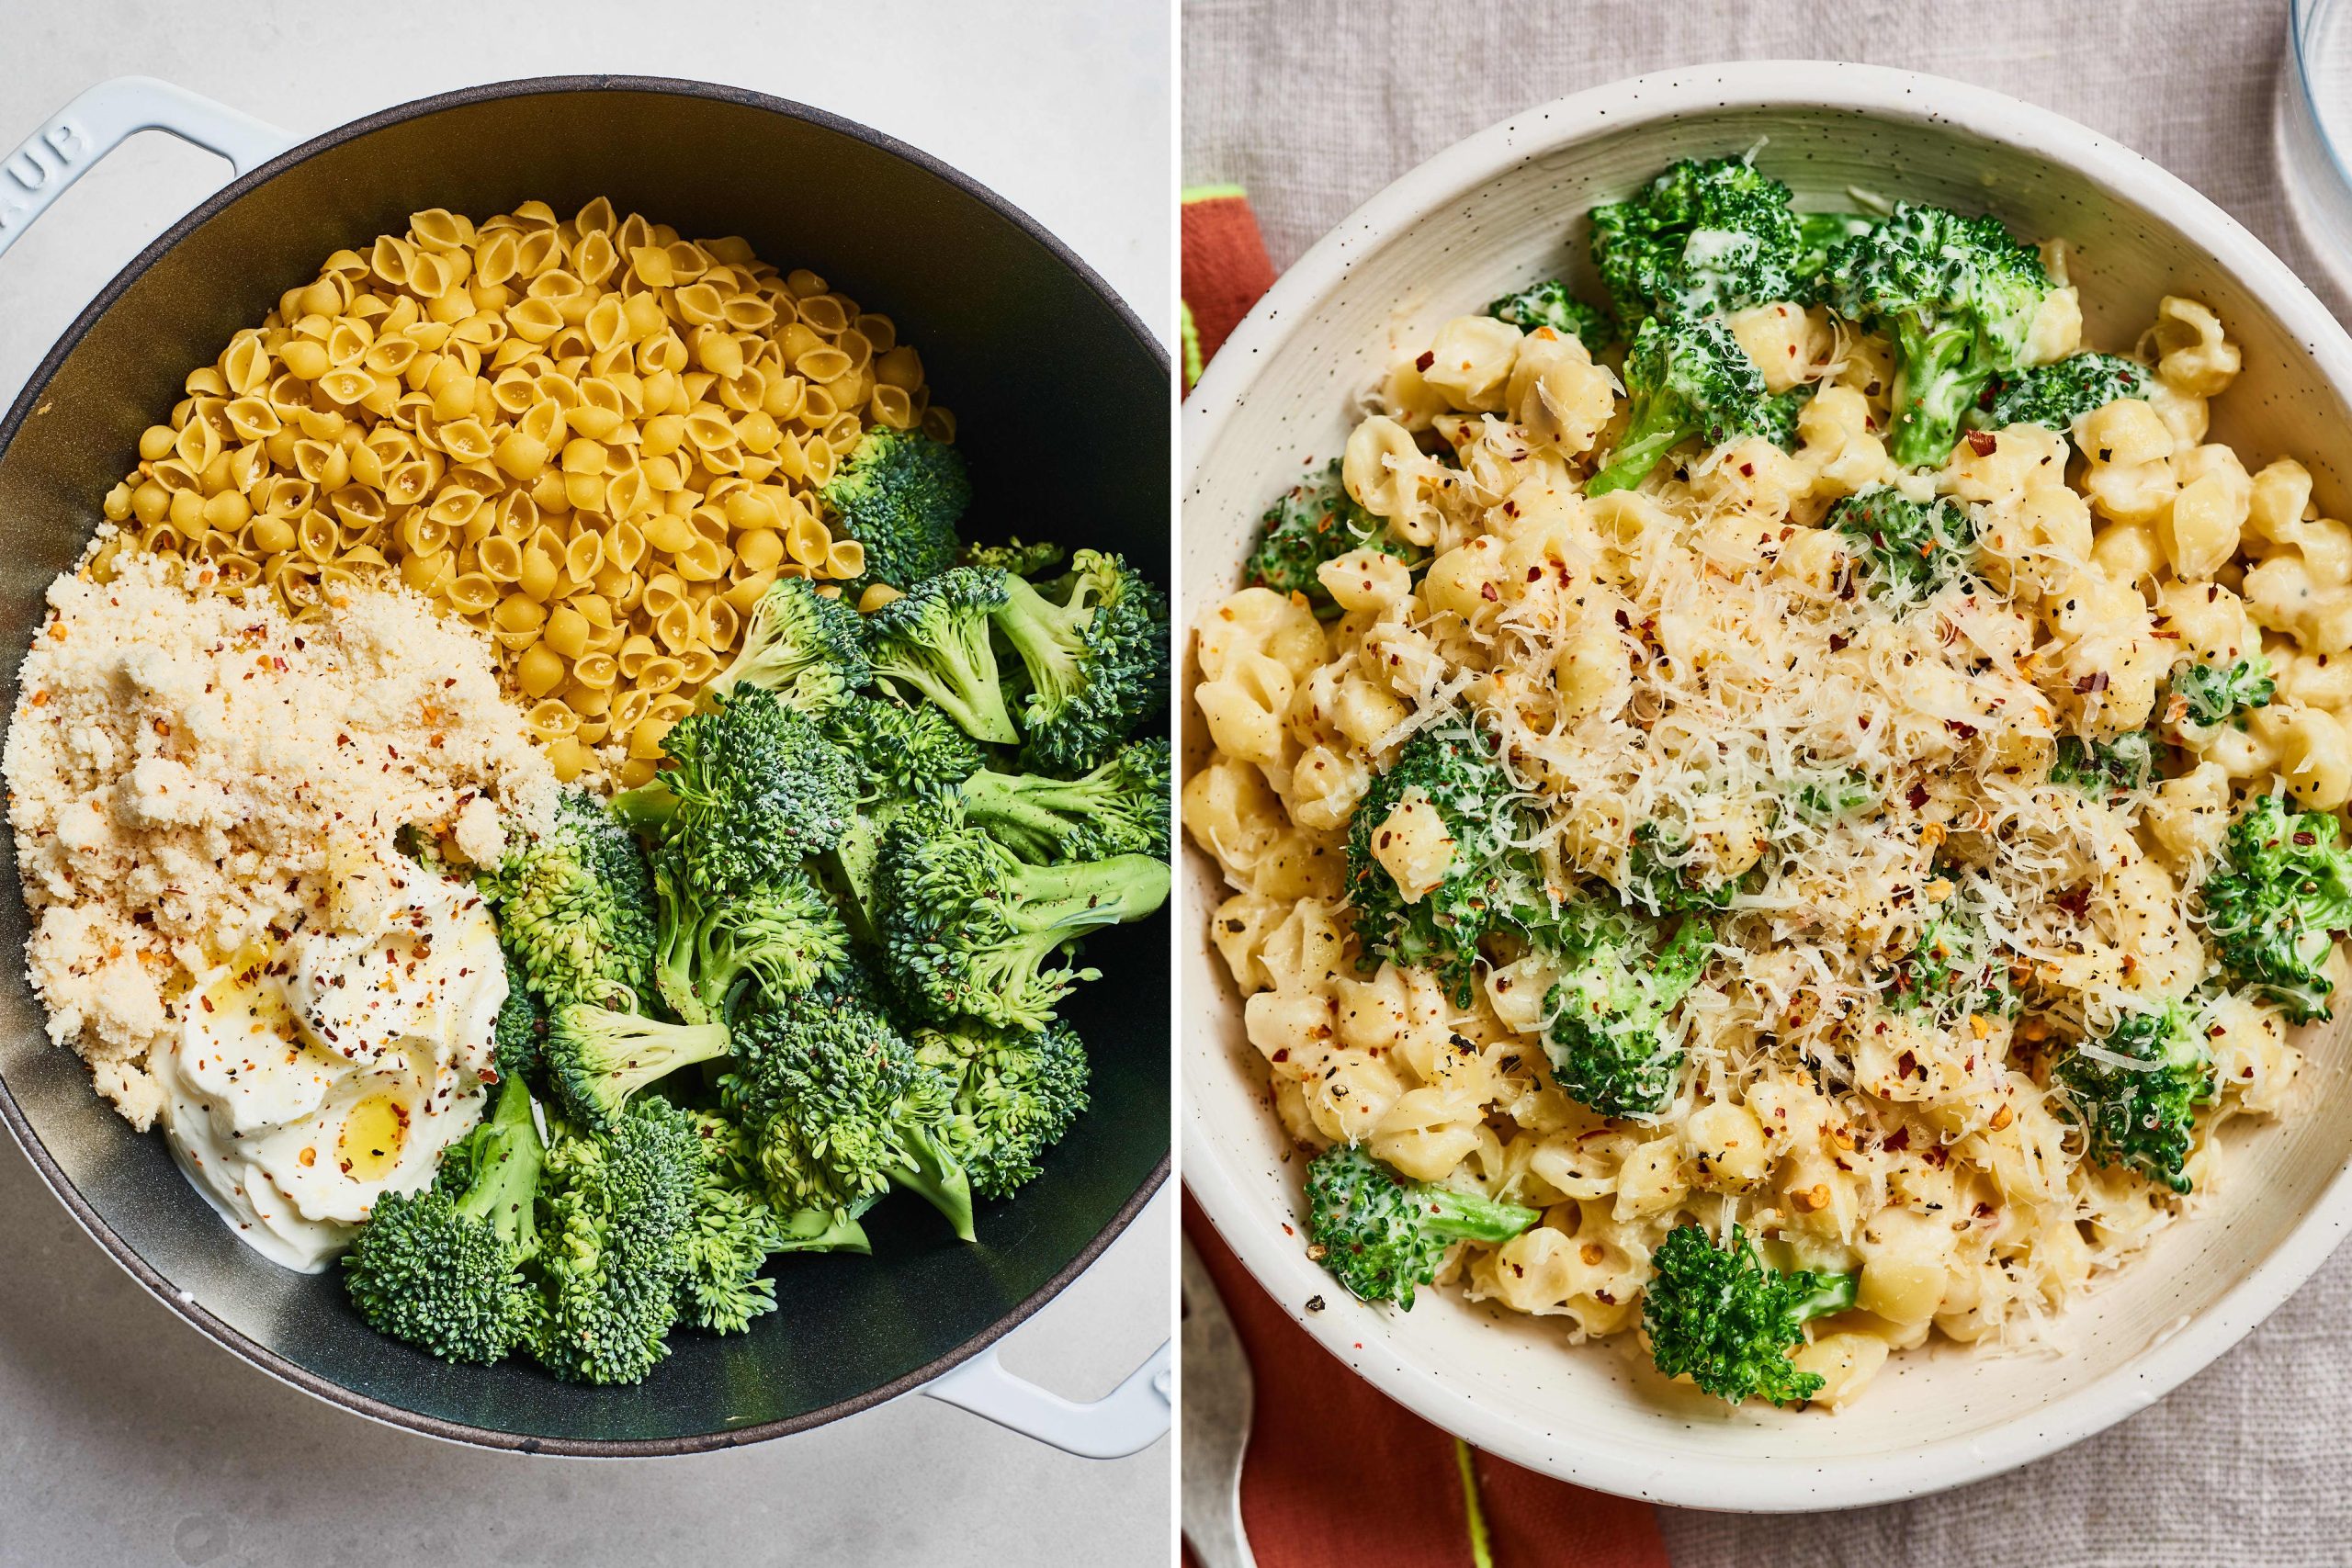 10 Delicious Vegetarian Hello Fresh Recipes for Meatless Mondays